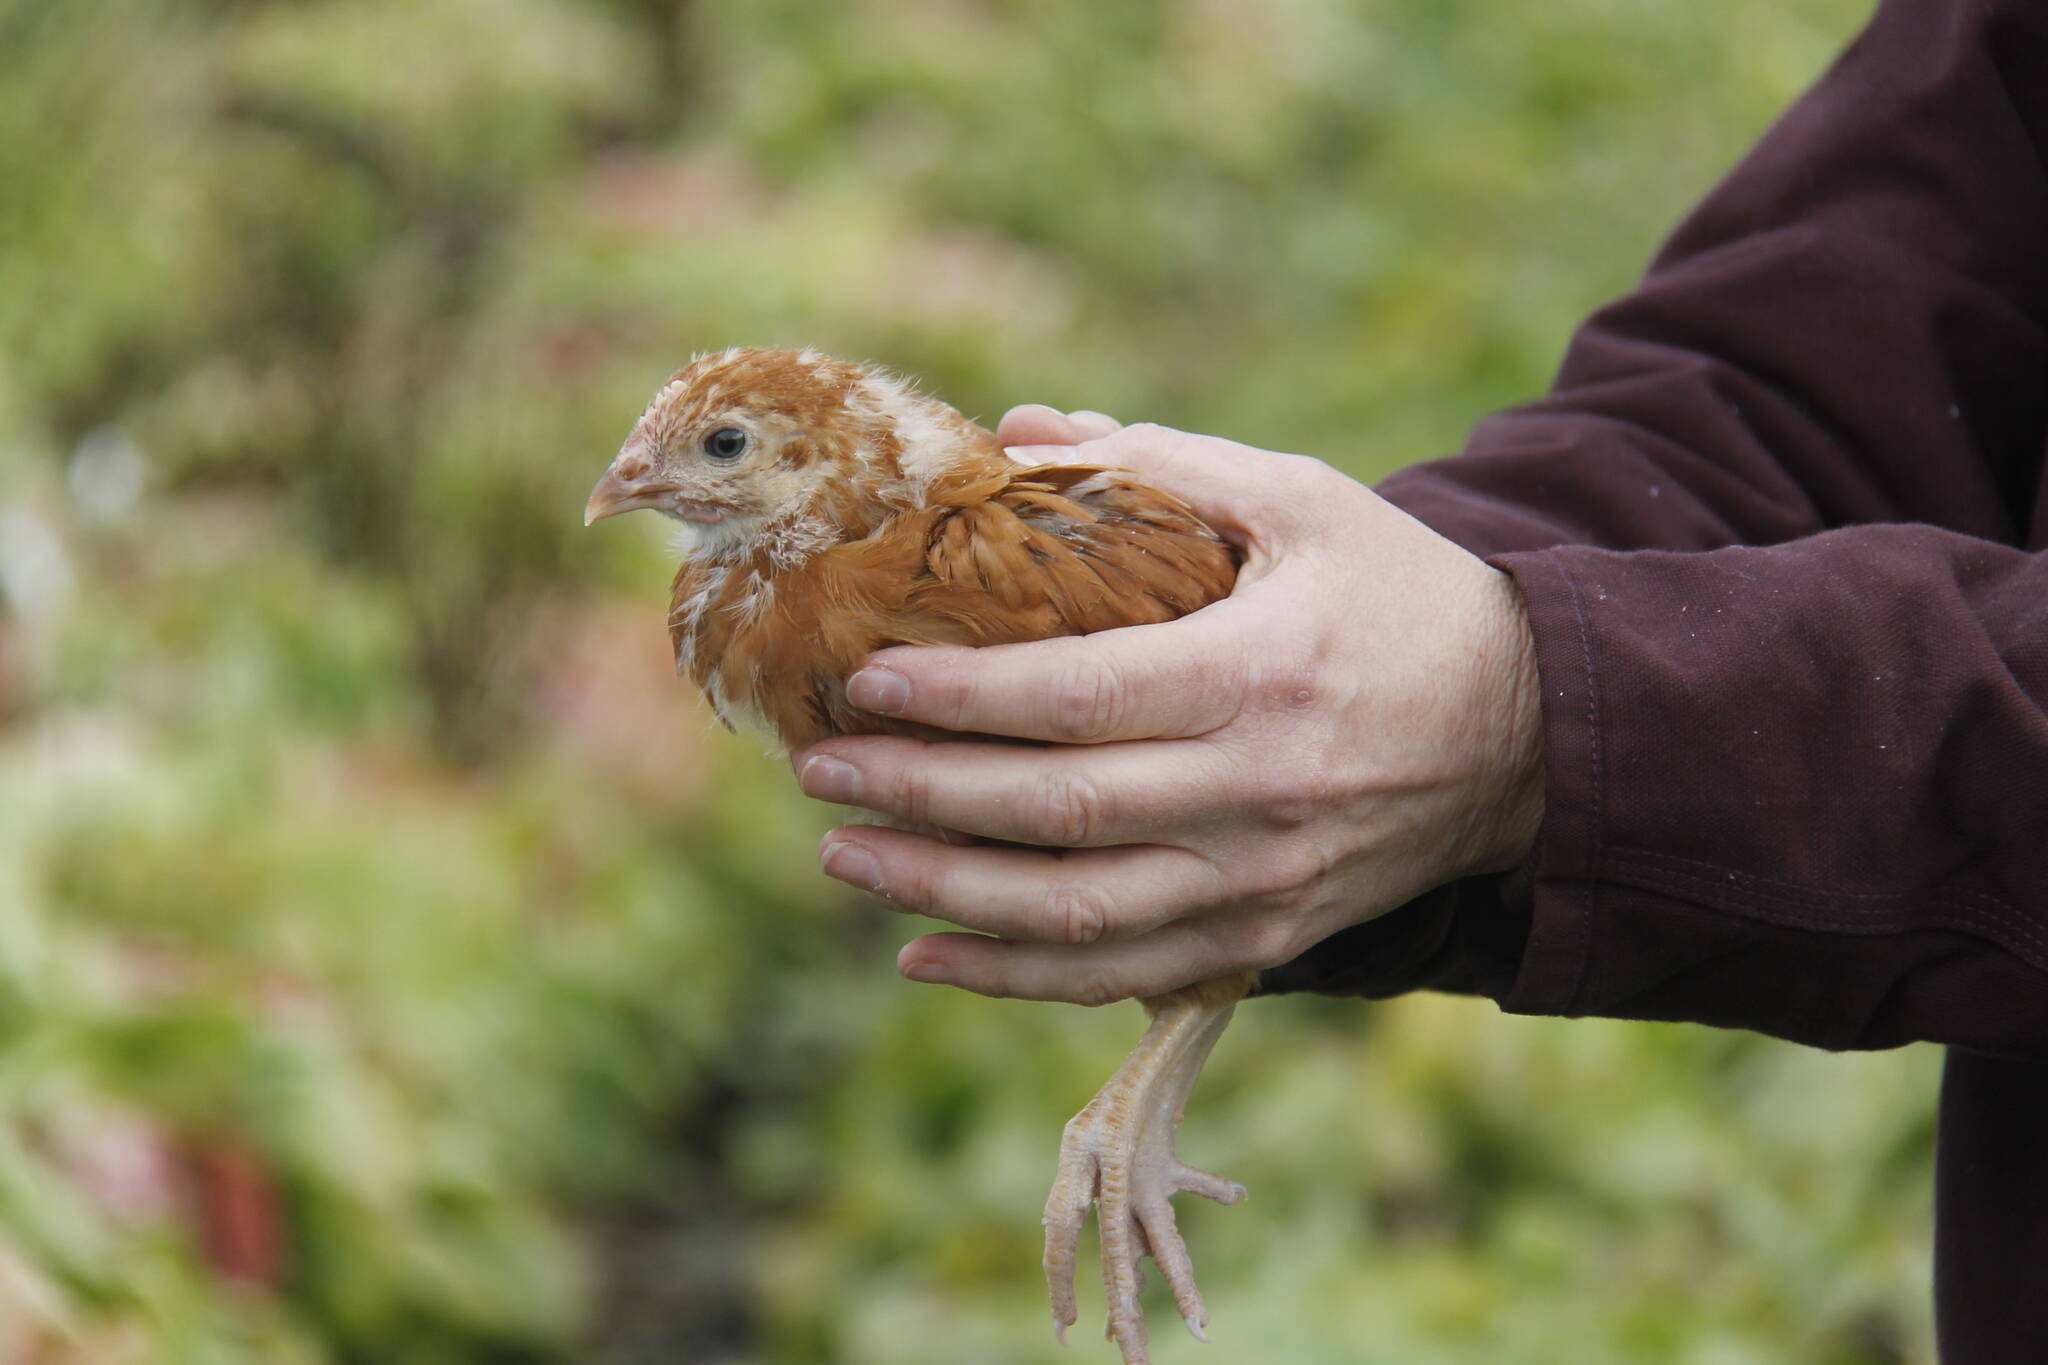 A 5-week-old Novogen chicken, which is a cross between a white leghorn rooster and a Rhode Island red hen. Once it matures, this chicken will lay about 5-6 eggs a week. (Photo by Kira Erickson/South Whidbey Record)